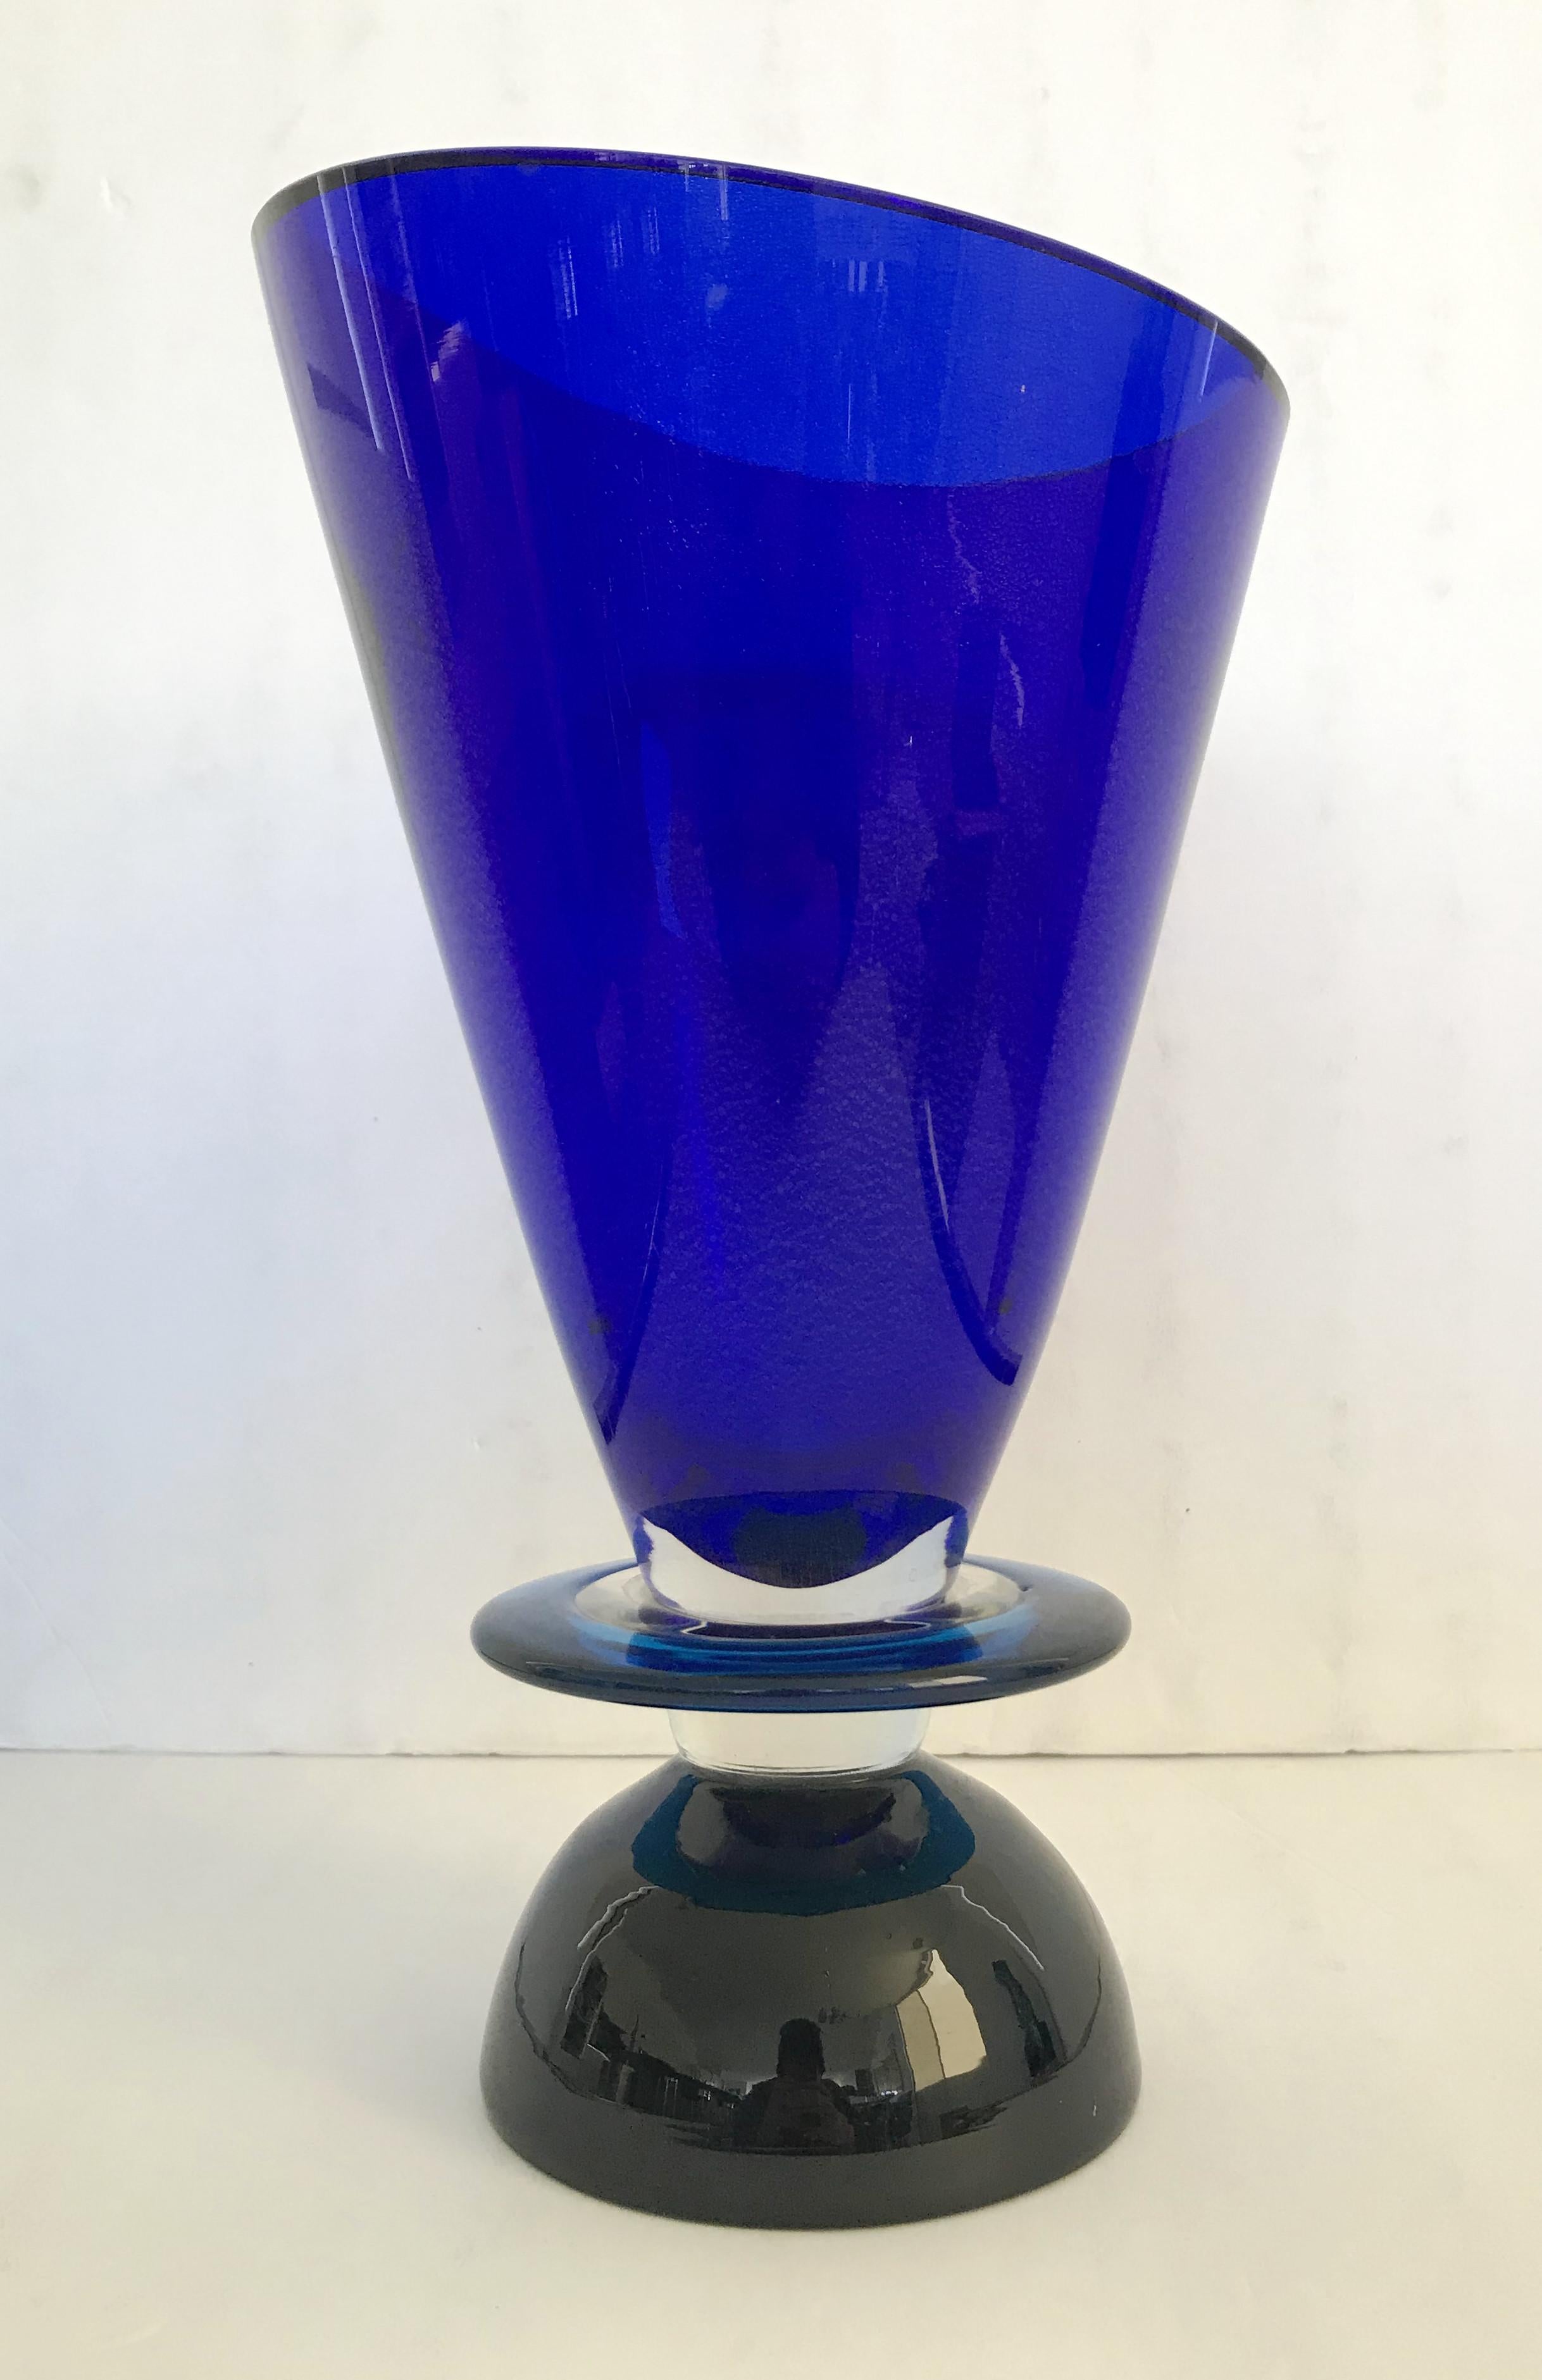 Memphis group inspired Murano glass vase, with a large dark blue cone shaped top infused with silver flecks, a round light blue disk, and a black dome shaped base / Made in Italy in 1994
Measures: height 13 inches, diameter 7.5 inches, base diameter